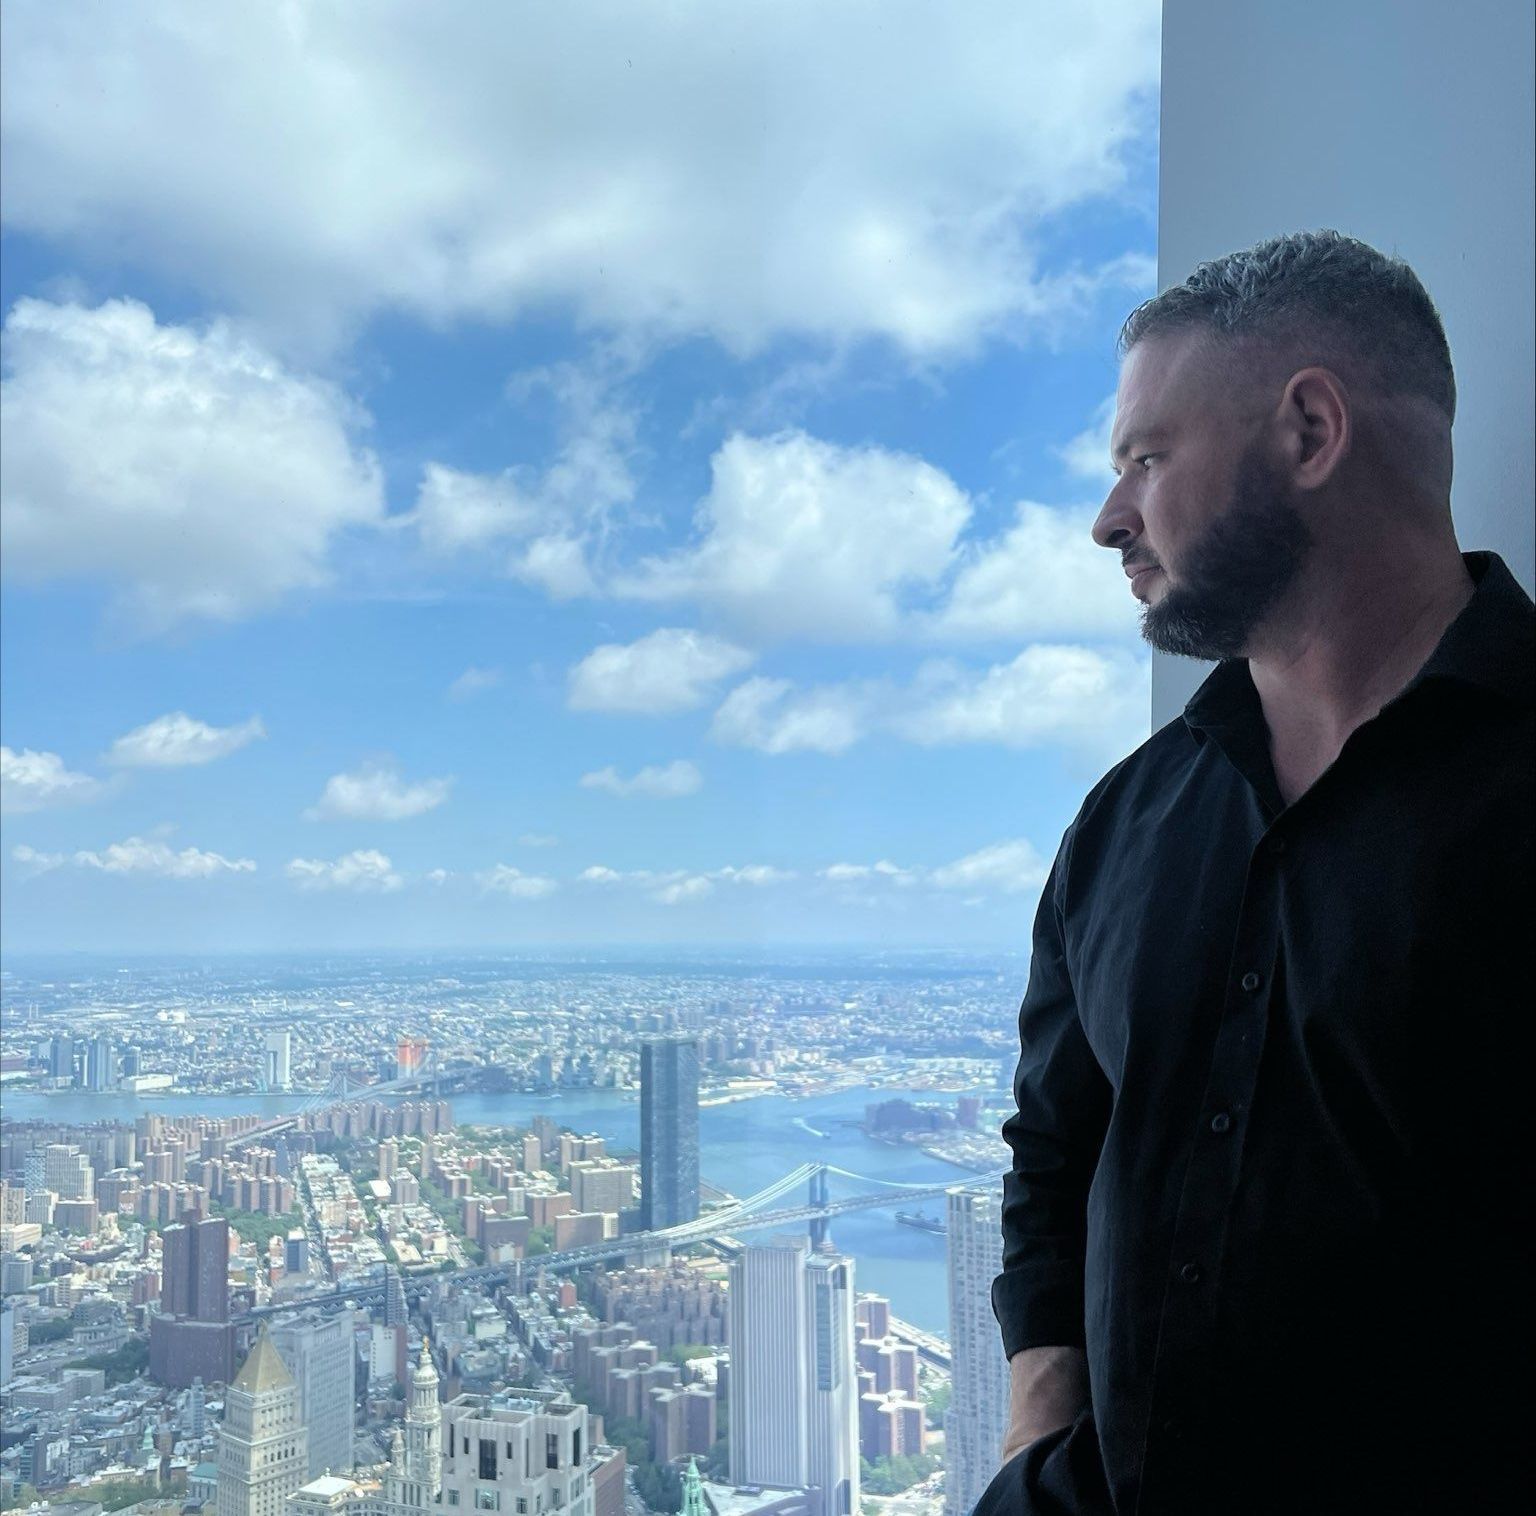 a man is standing in front of a window overlooking a city .